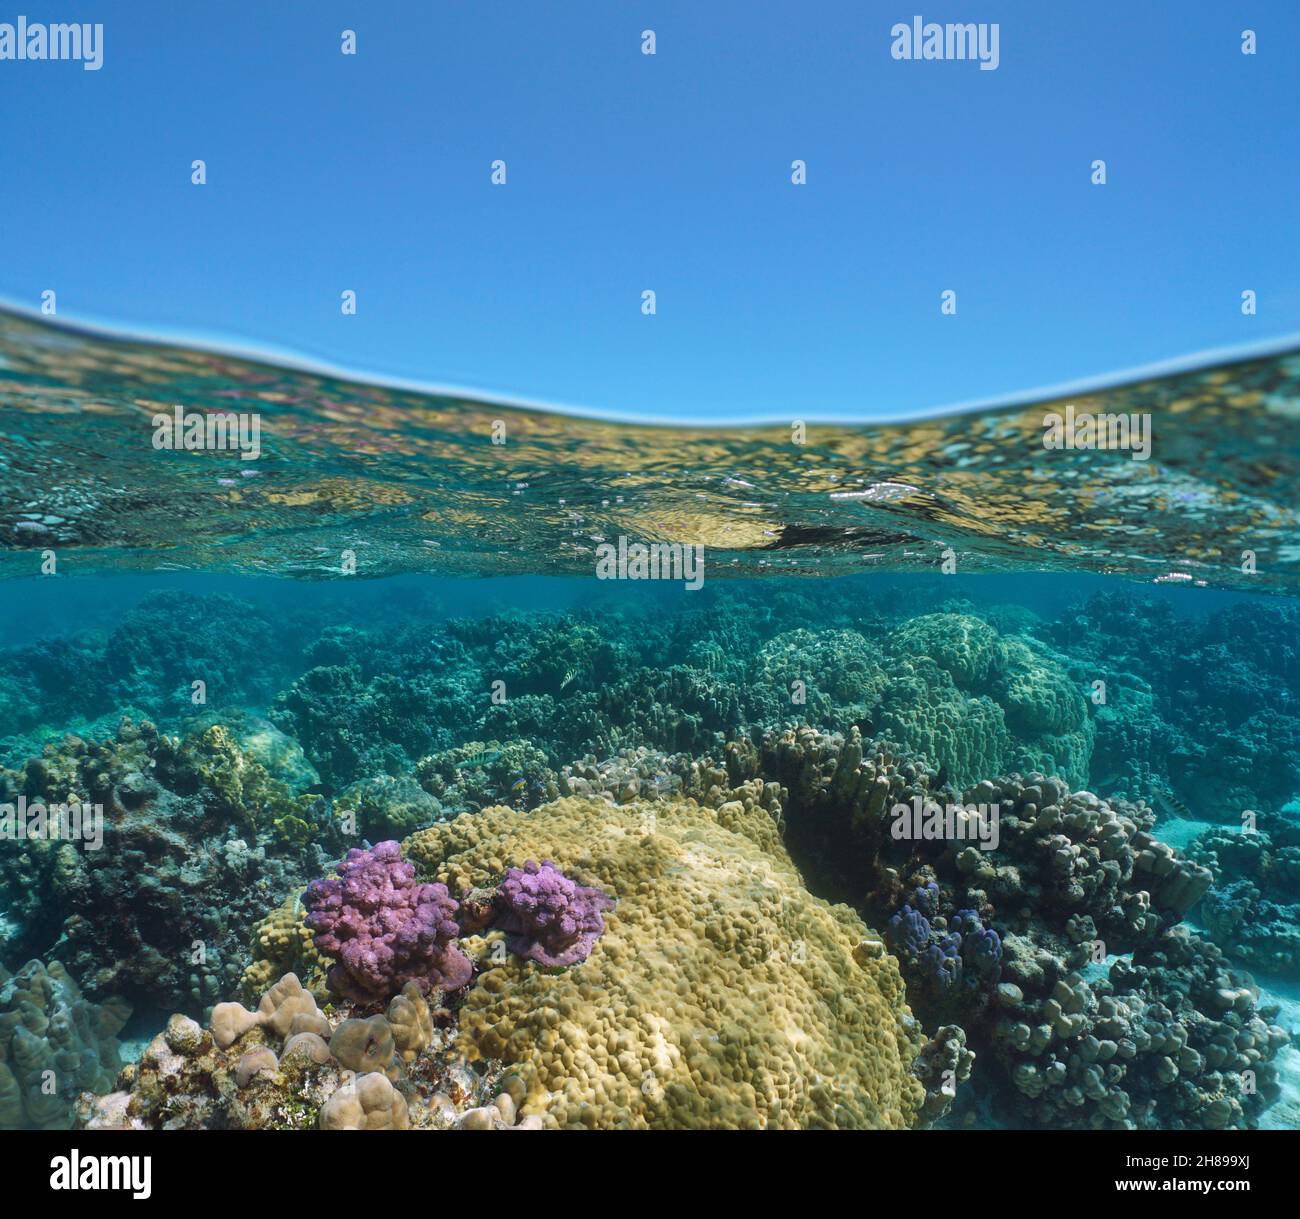 Coral reef underwater sea and blue sky, seascape over and under water surface, south Pacific ocean, French Polynesia Stock Photo